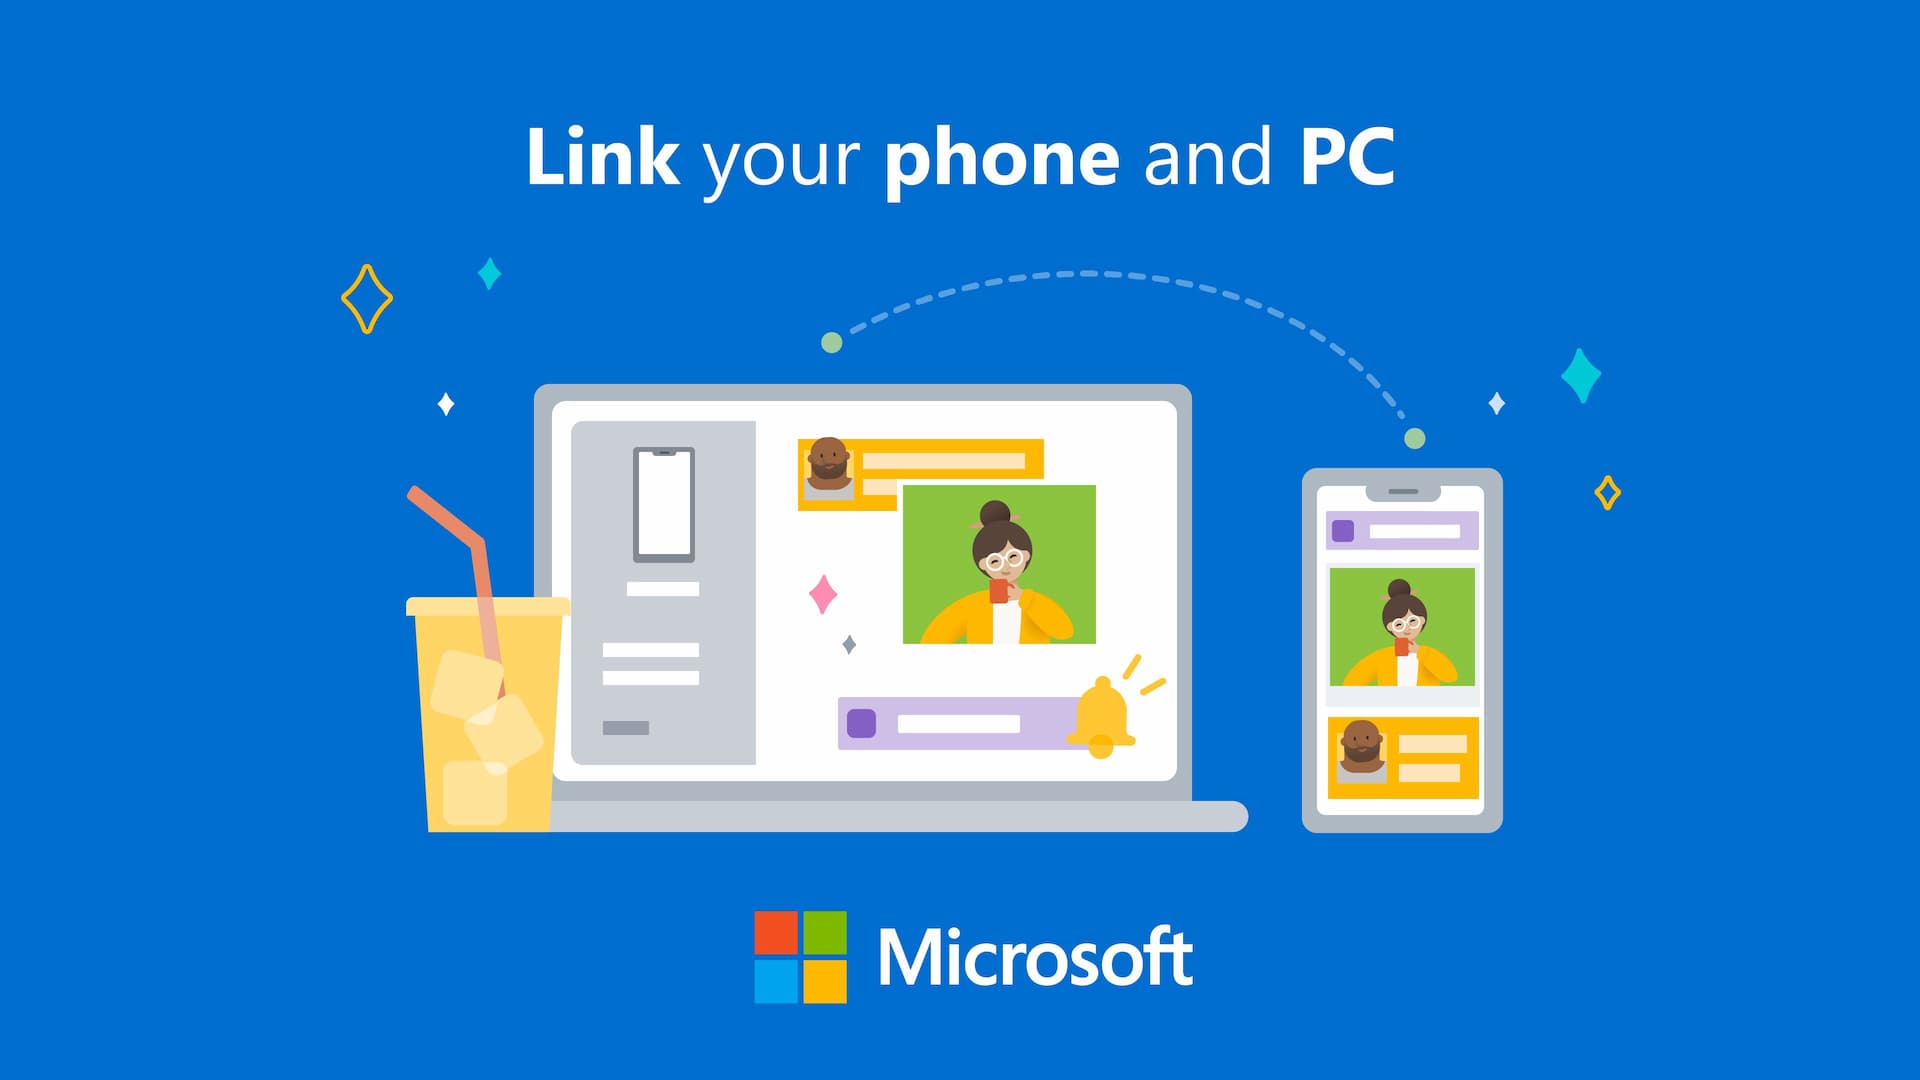 Phone Link app by Microsoft enables to use iMessage from a Windows device